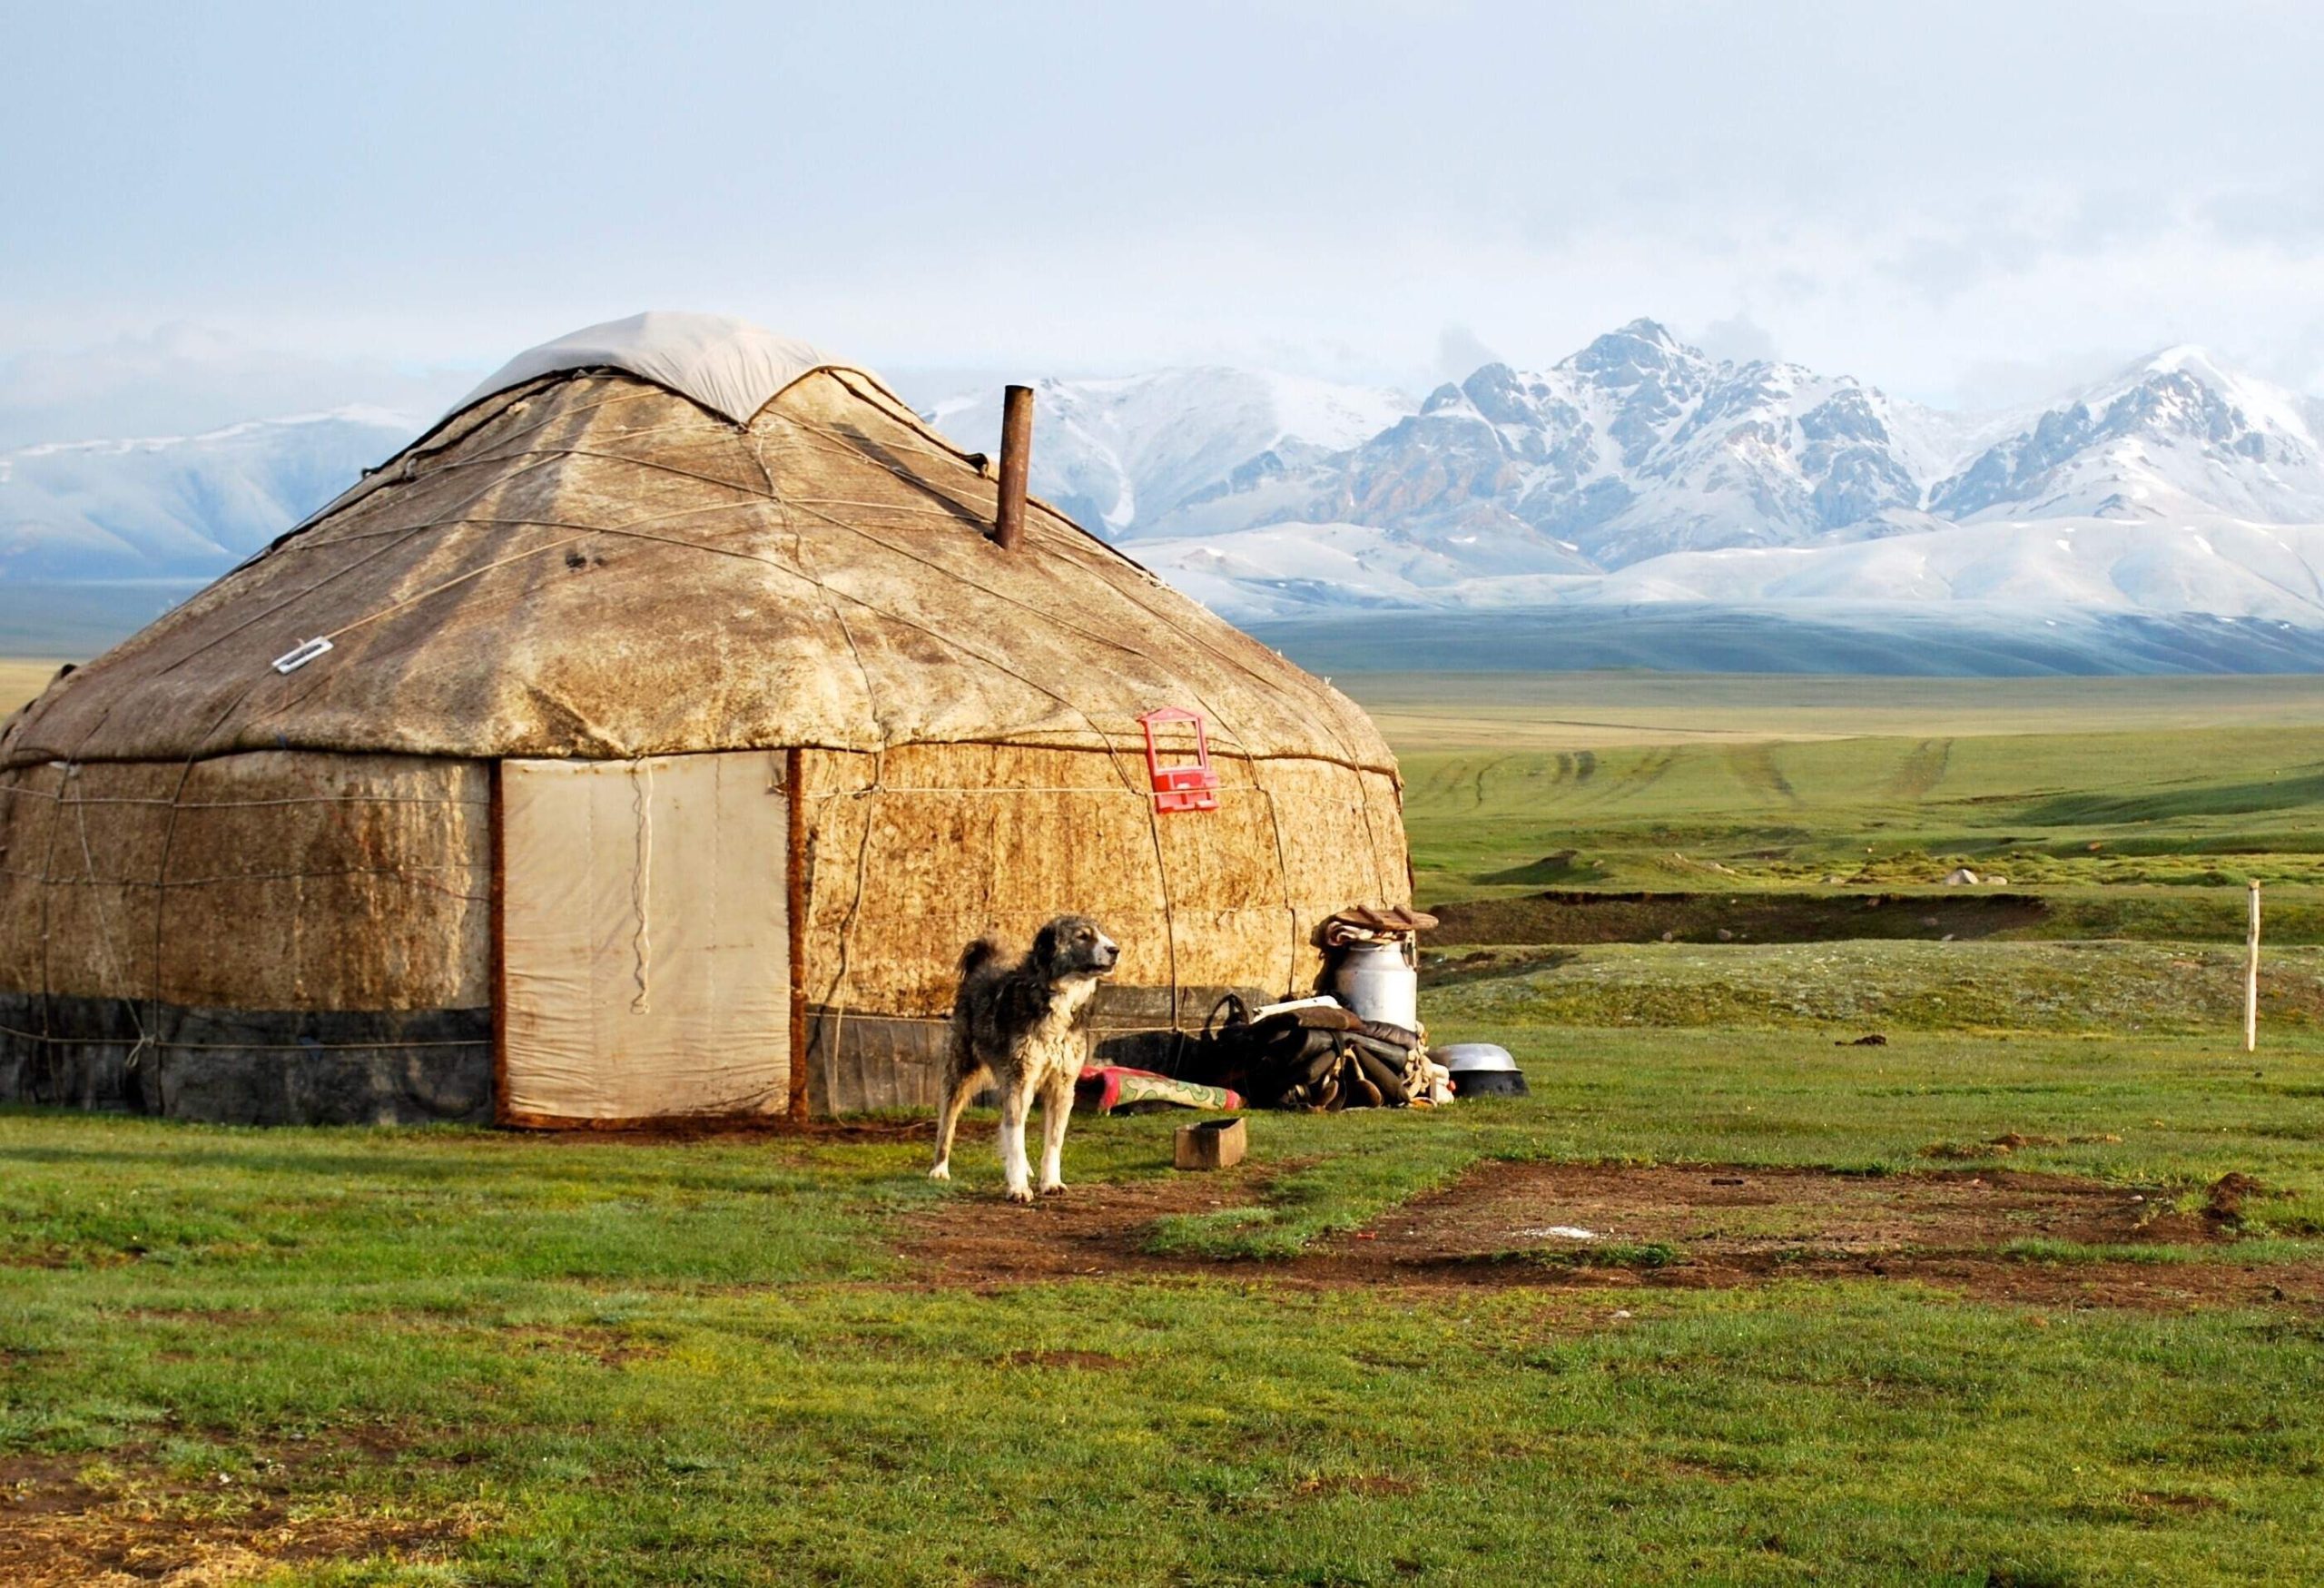 A dog stands outside a circular leather tent with distant views of mountains covered in snow.